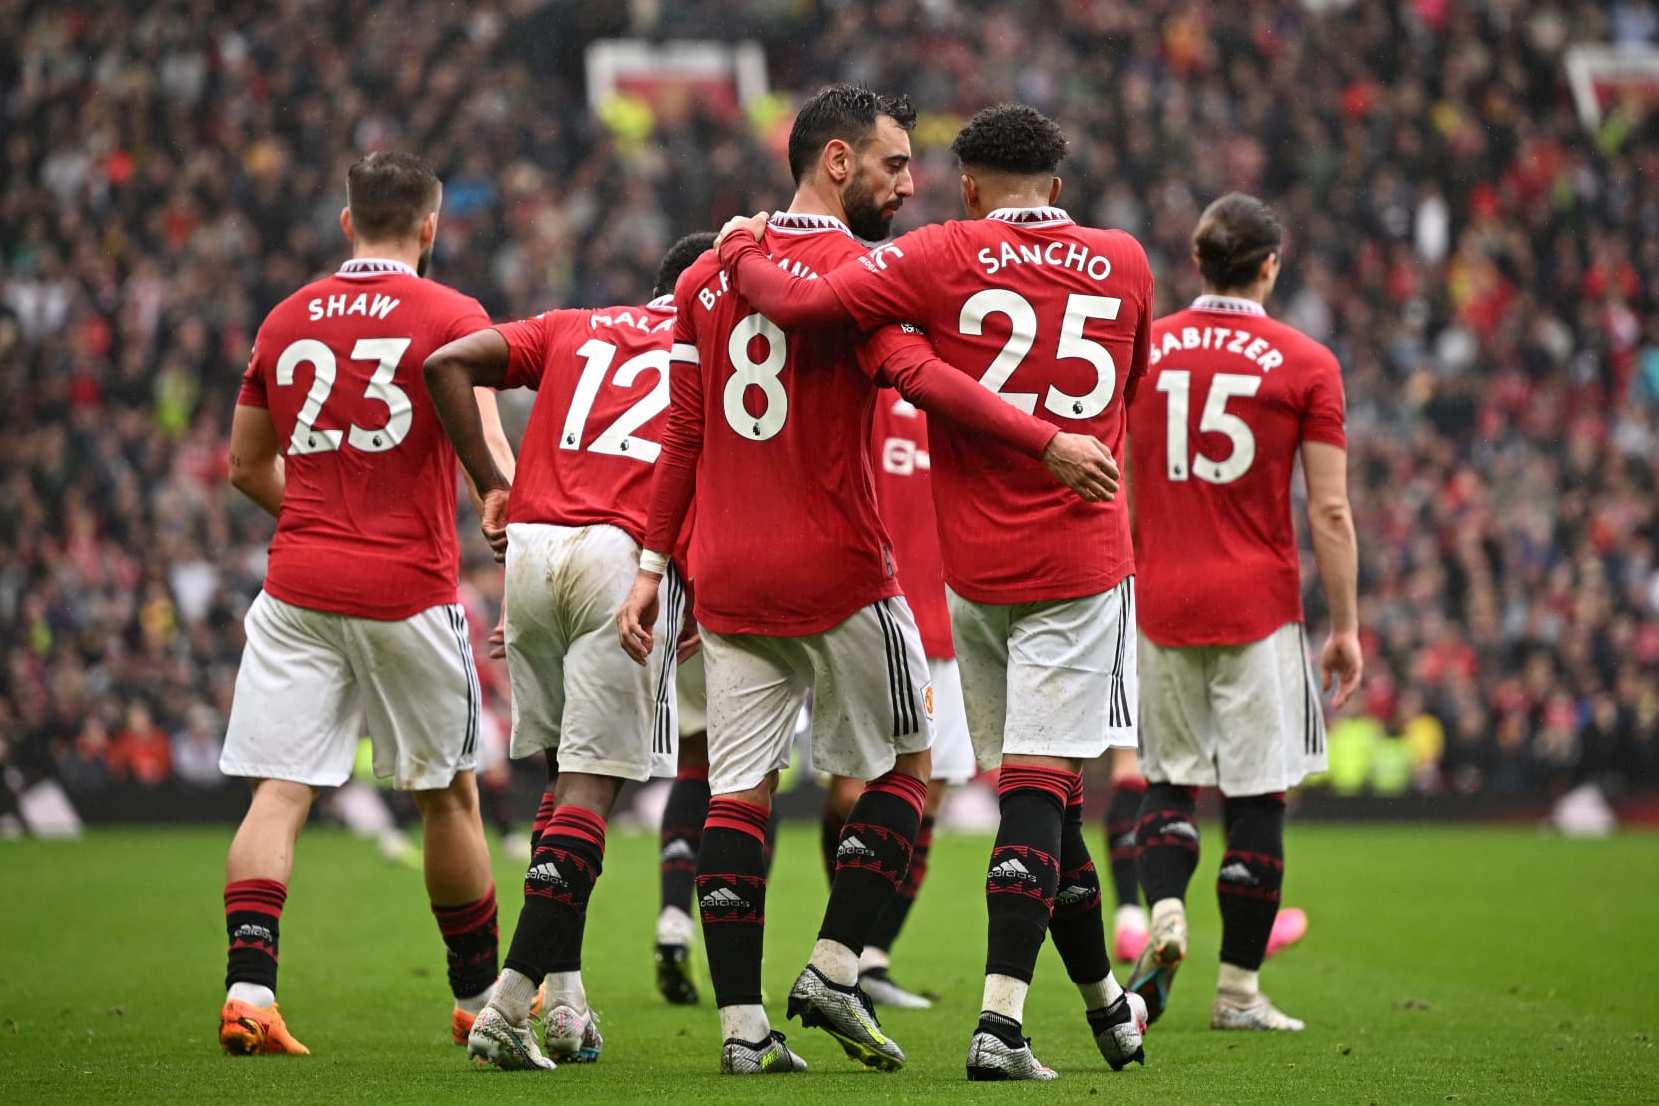 World's 50 Most Valuable Soccer Teams: Man United, Real Madrid Lead –